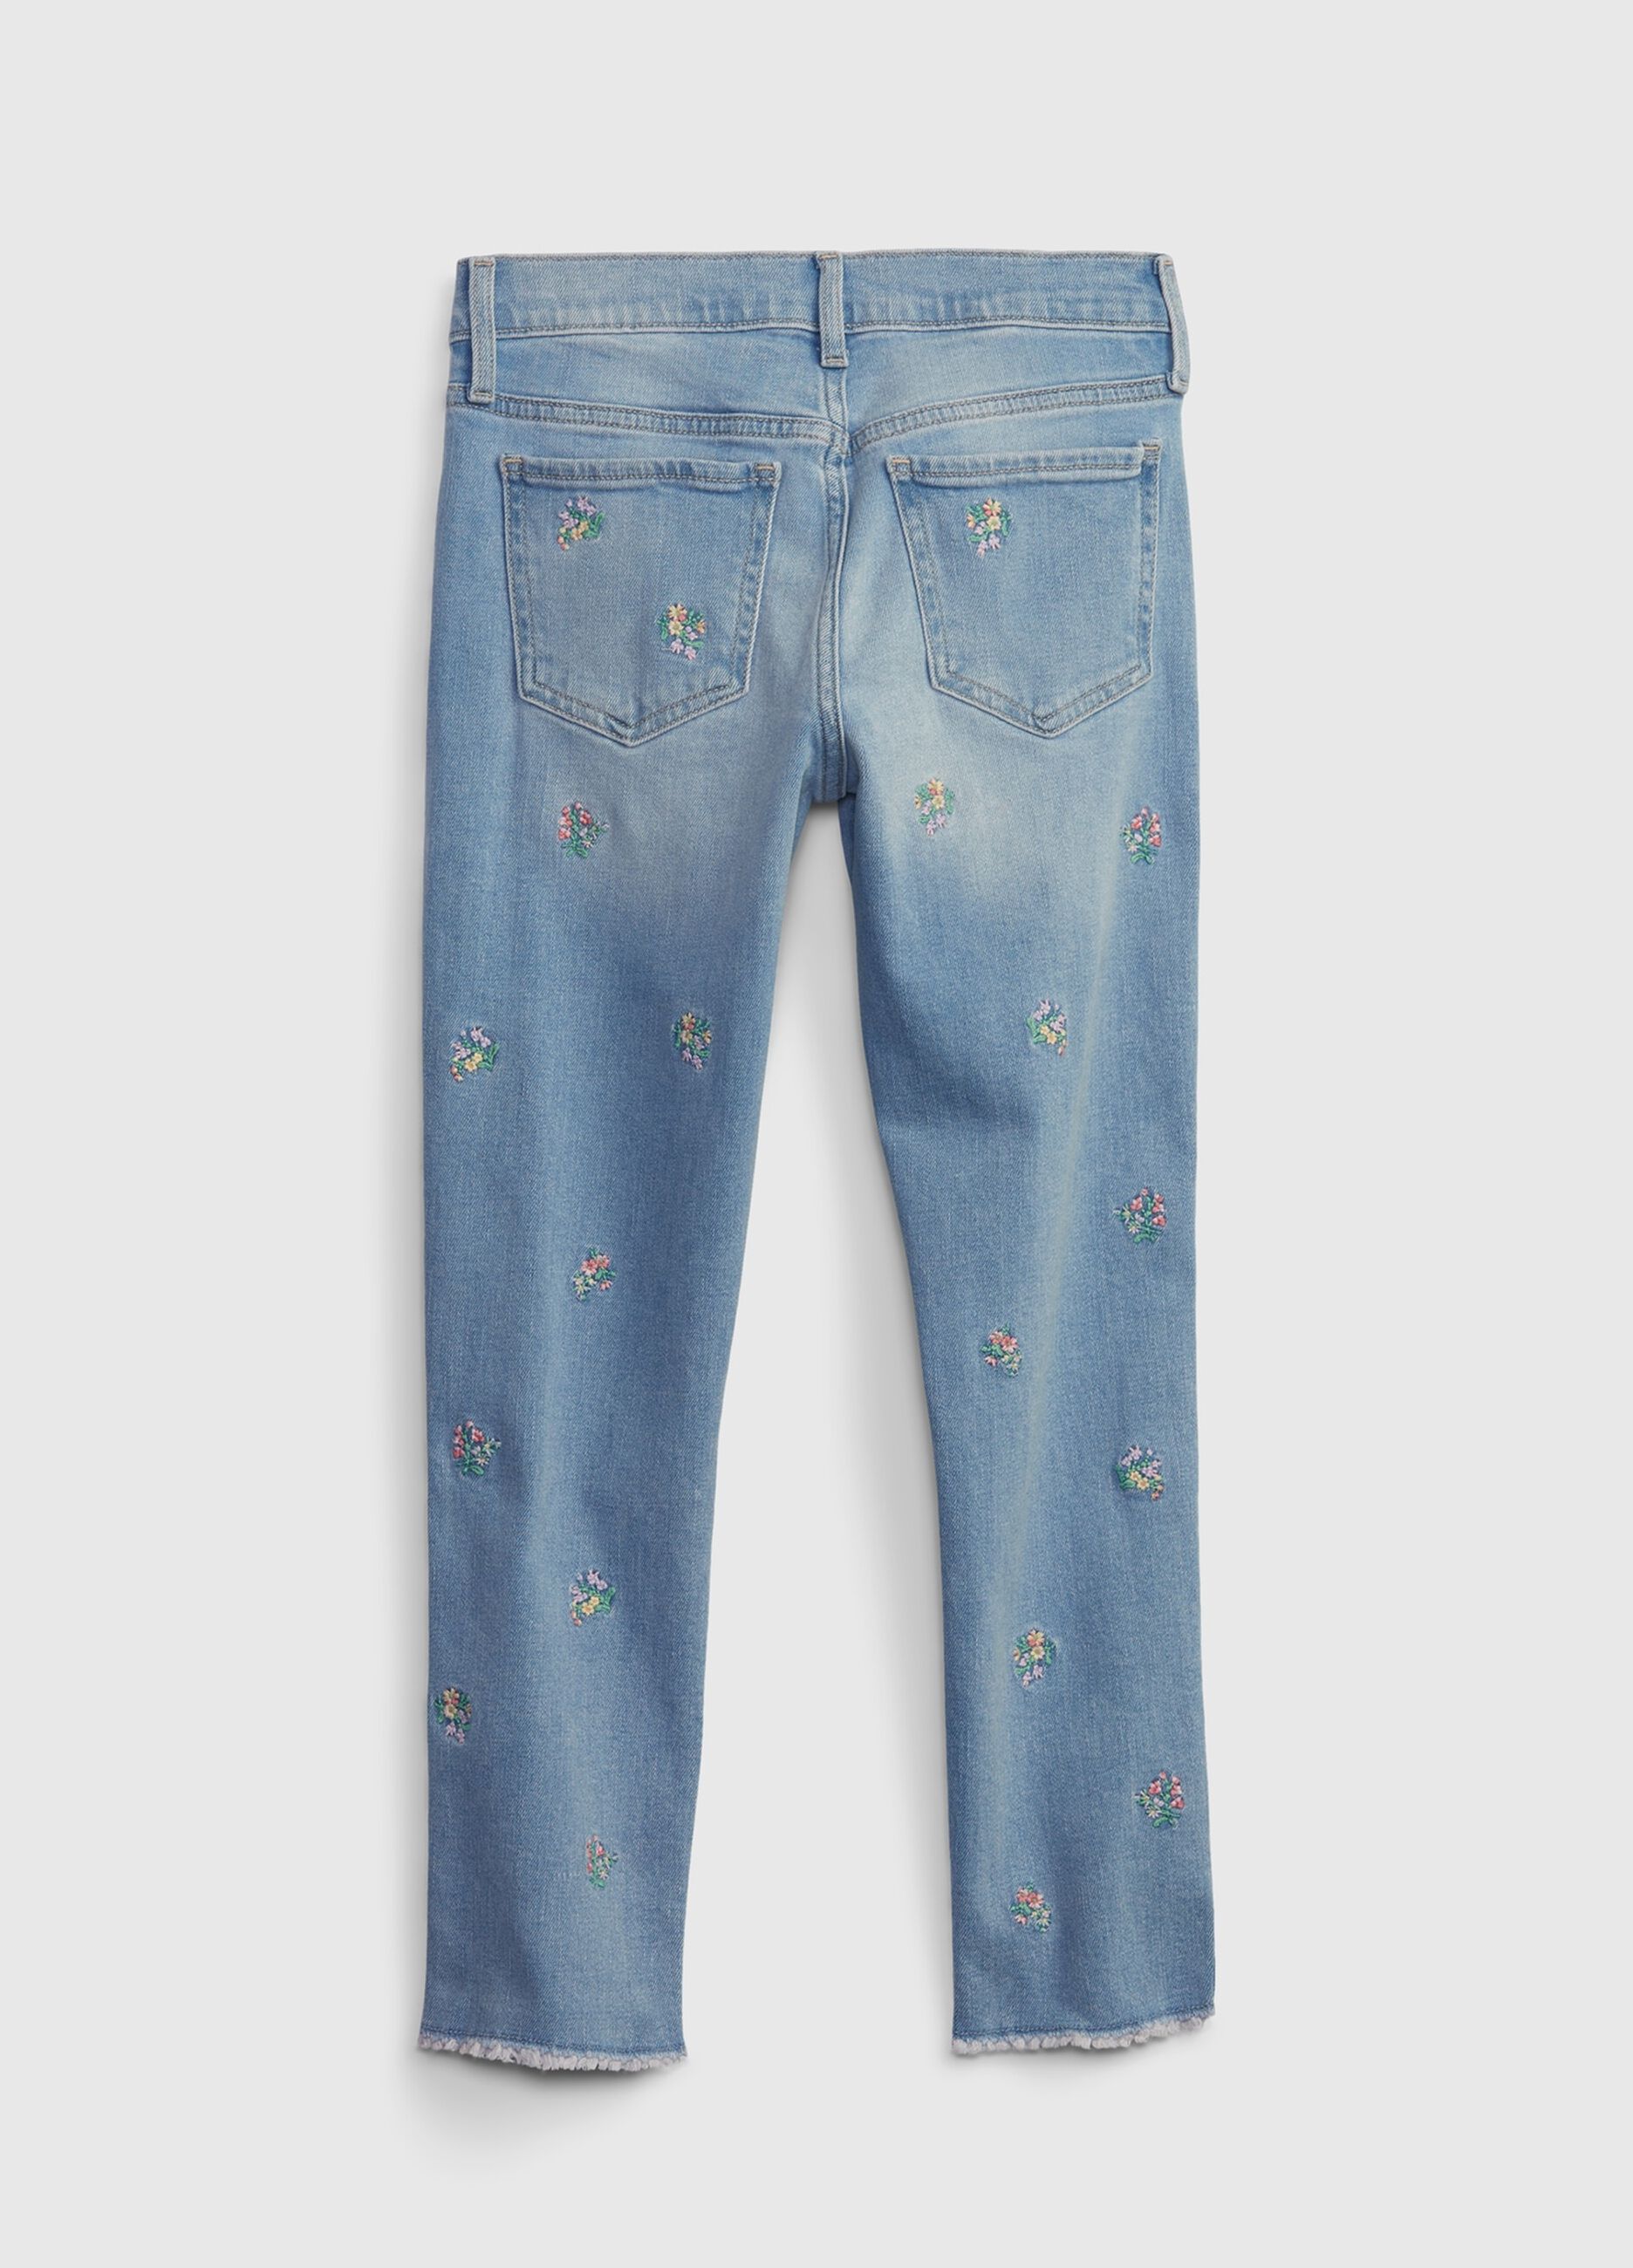 Slim-fit jeans with embroidered flowers